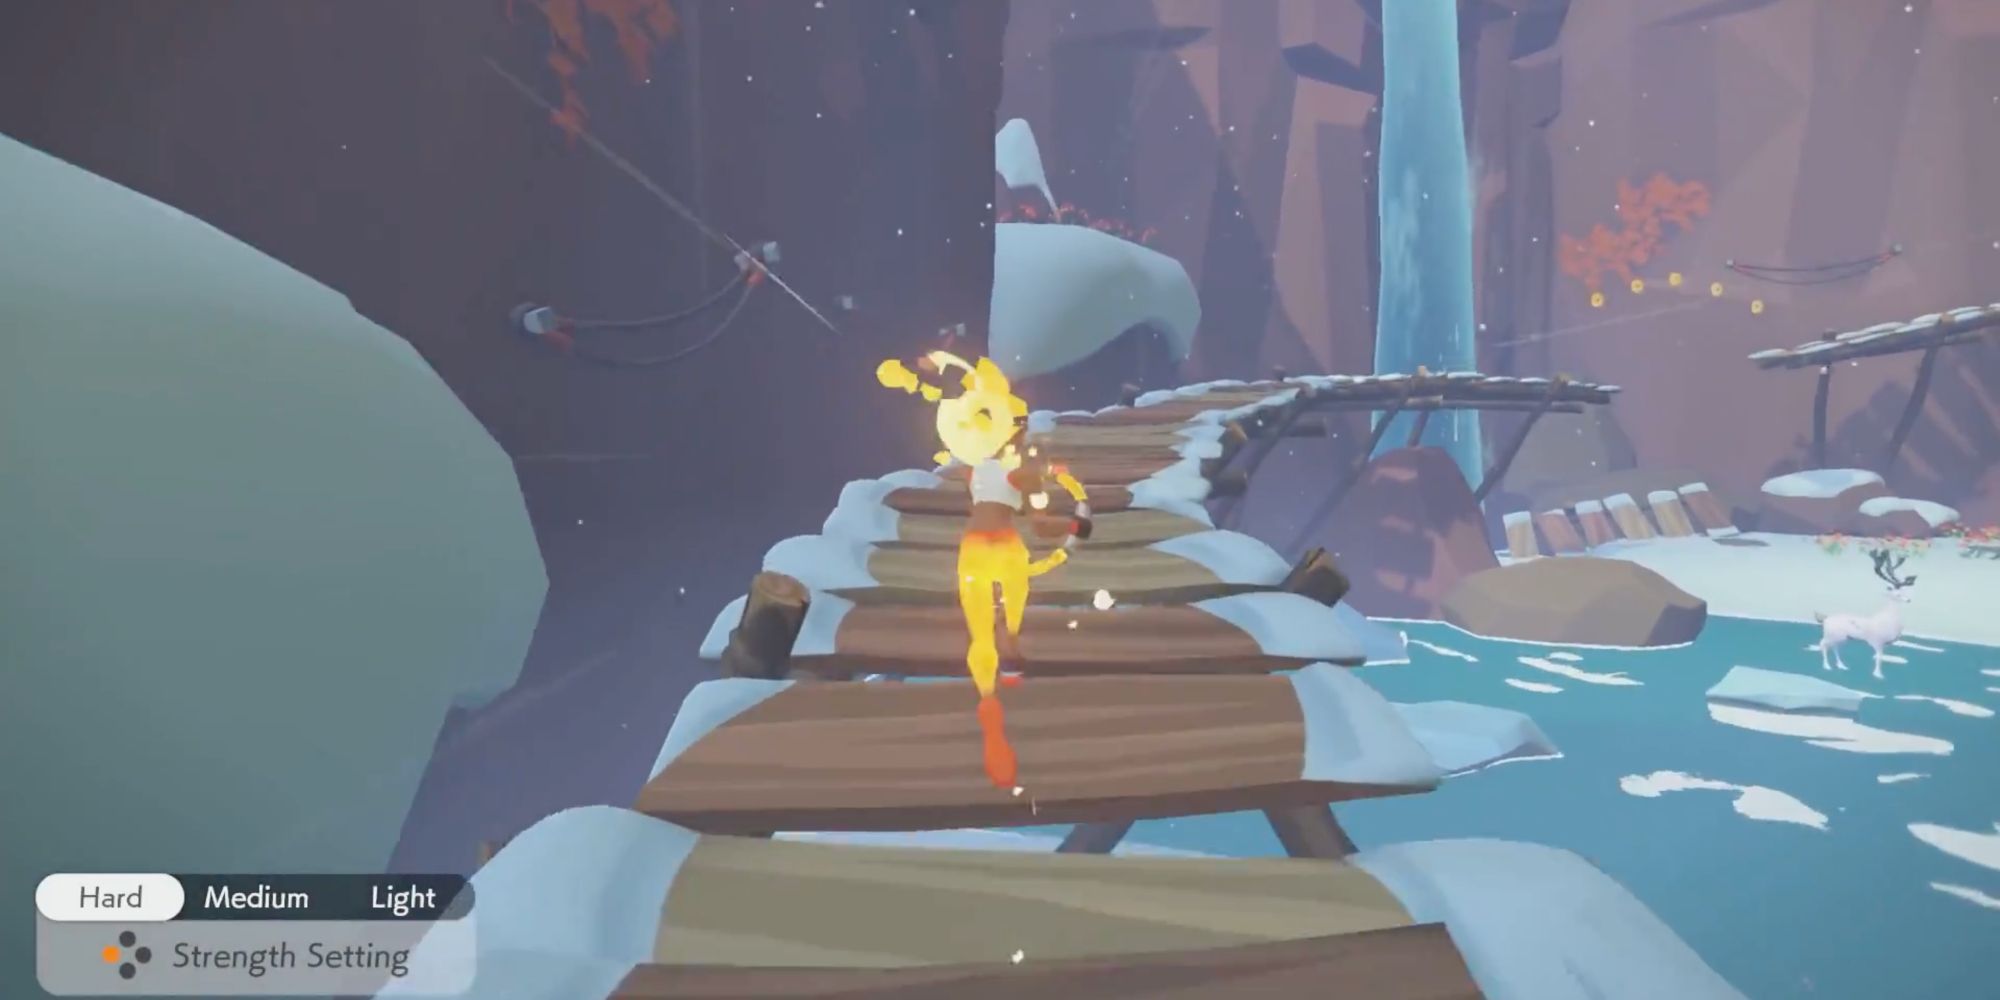 The athlete jogs through a snowy landscape in Ring Fit Adventure